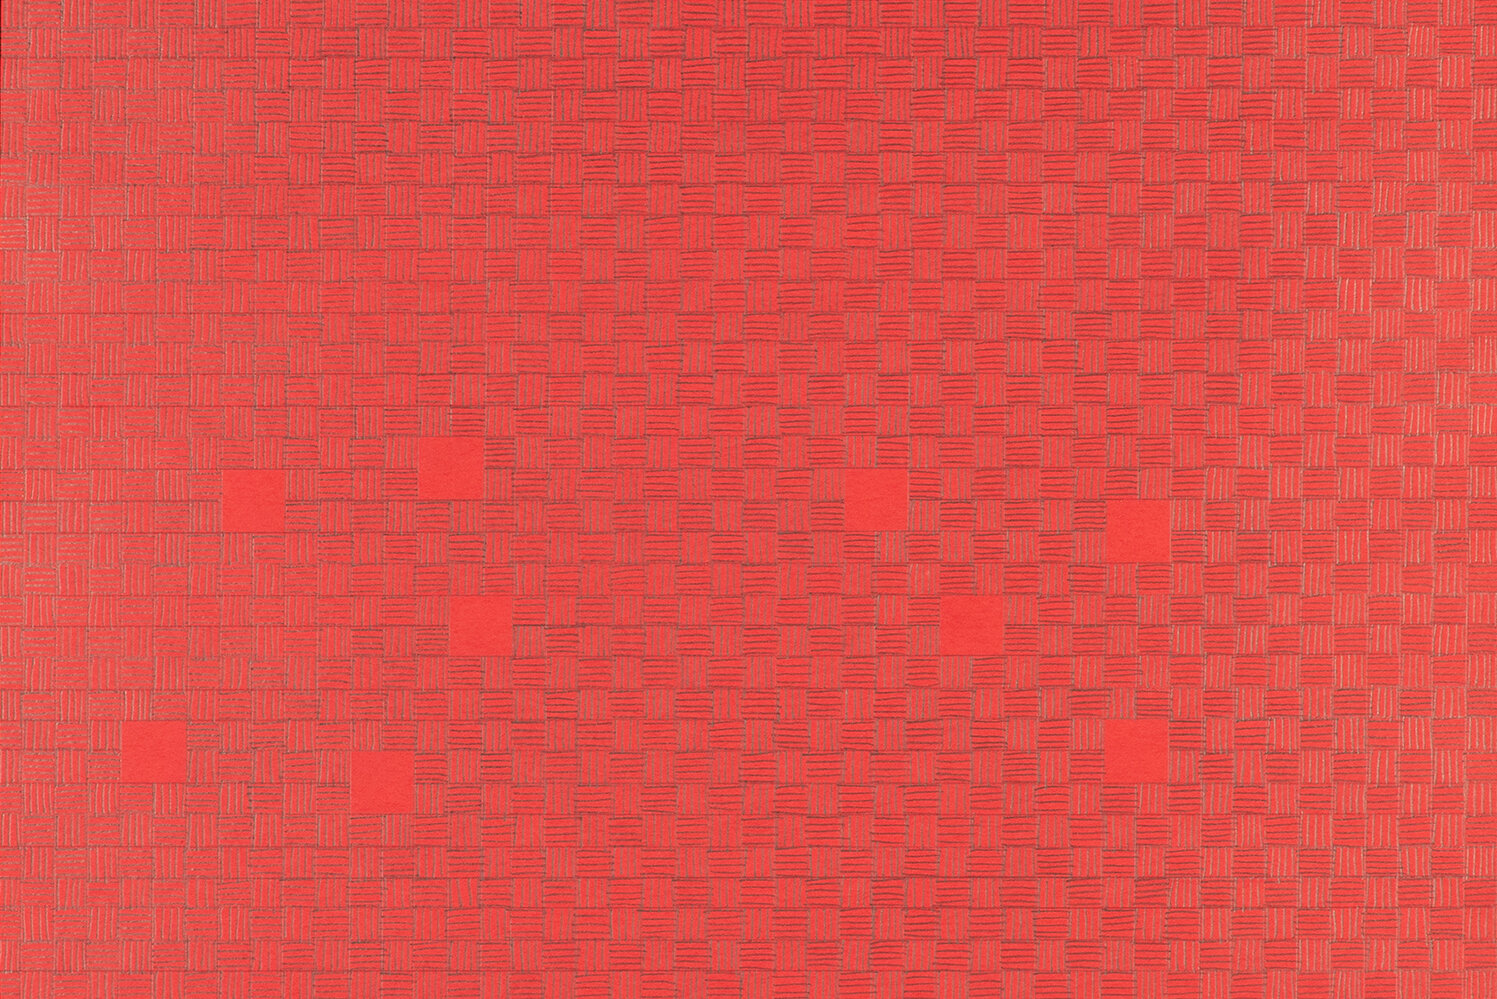   September: Red Grid Weave  (Detail) Graphite on Construction Paper 8” x 11 ½” each (42” x 42” installed) 2018 